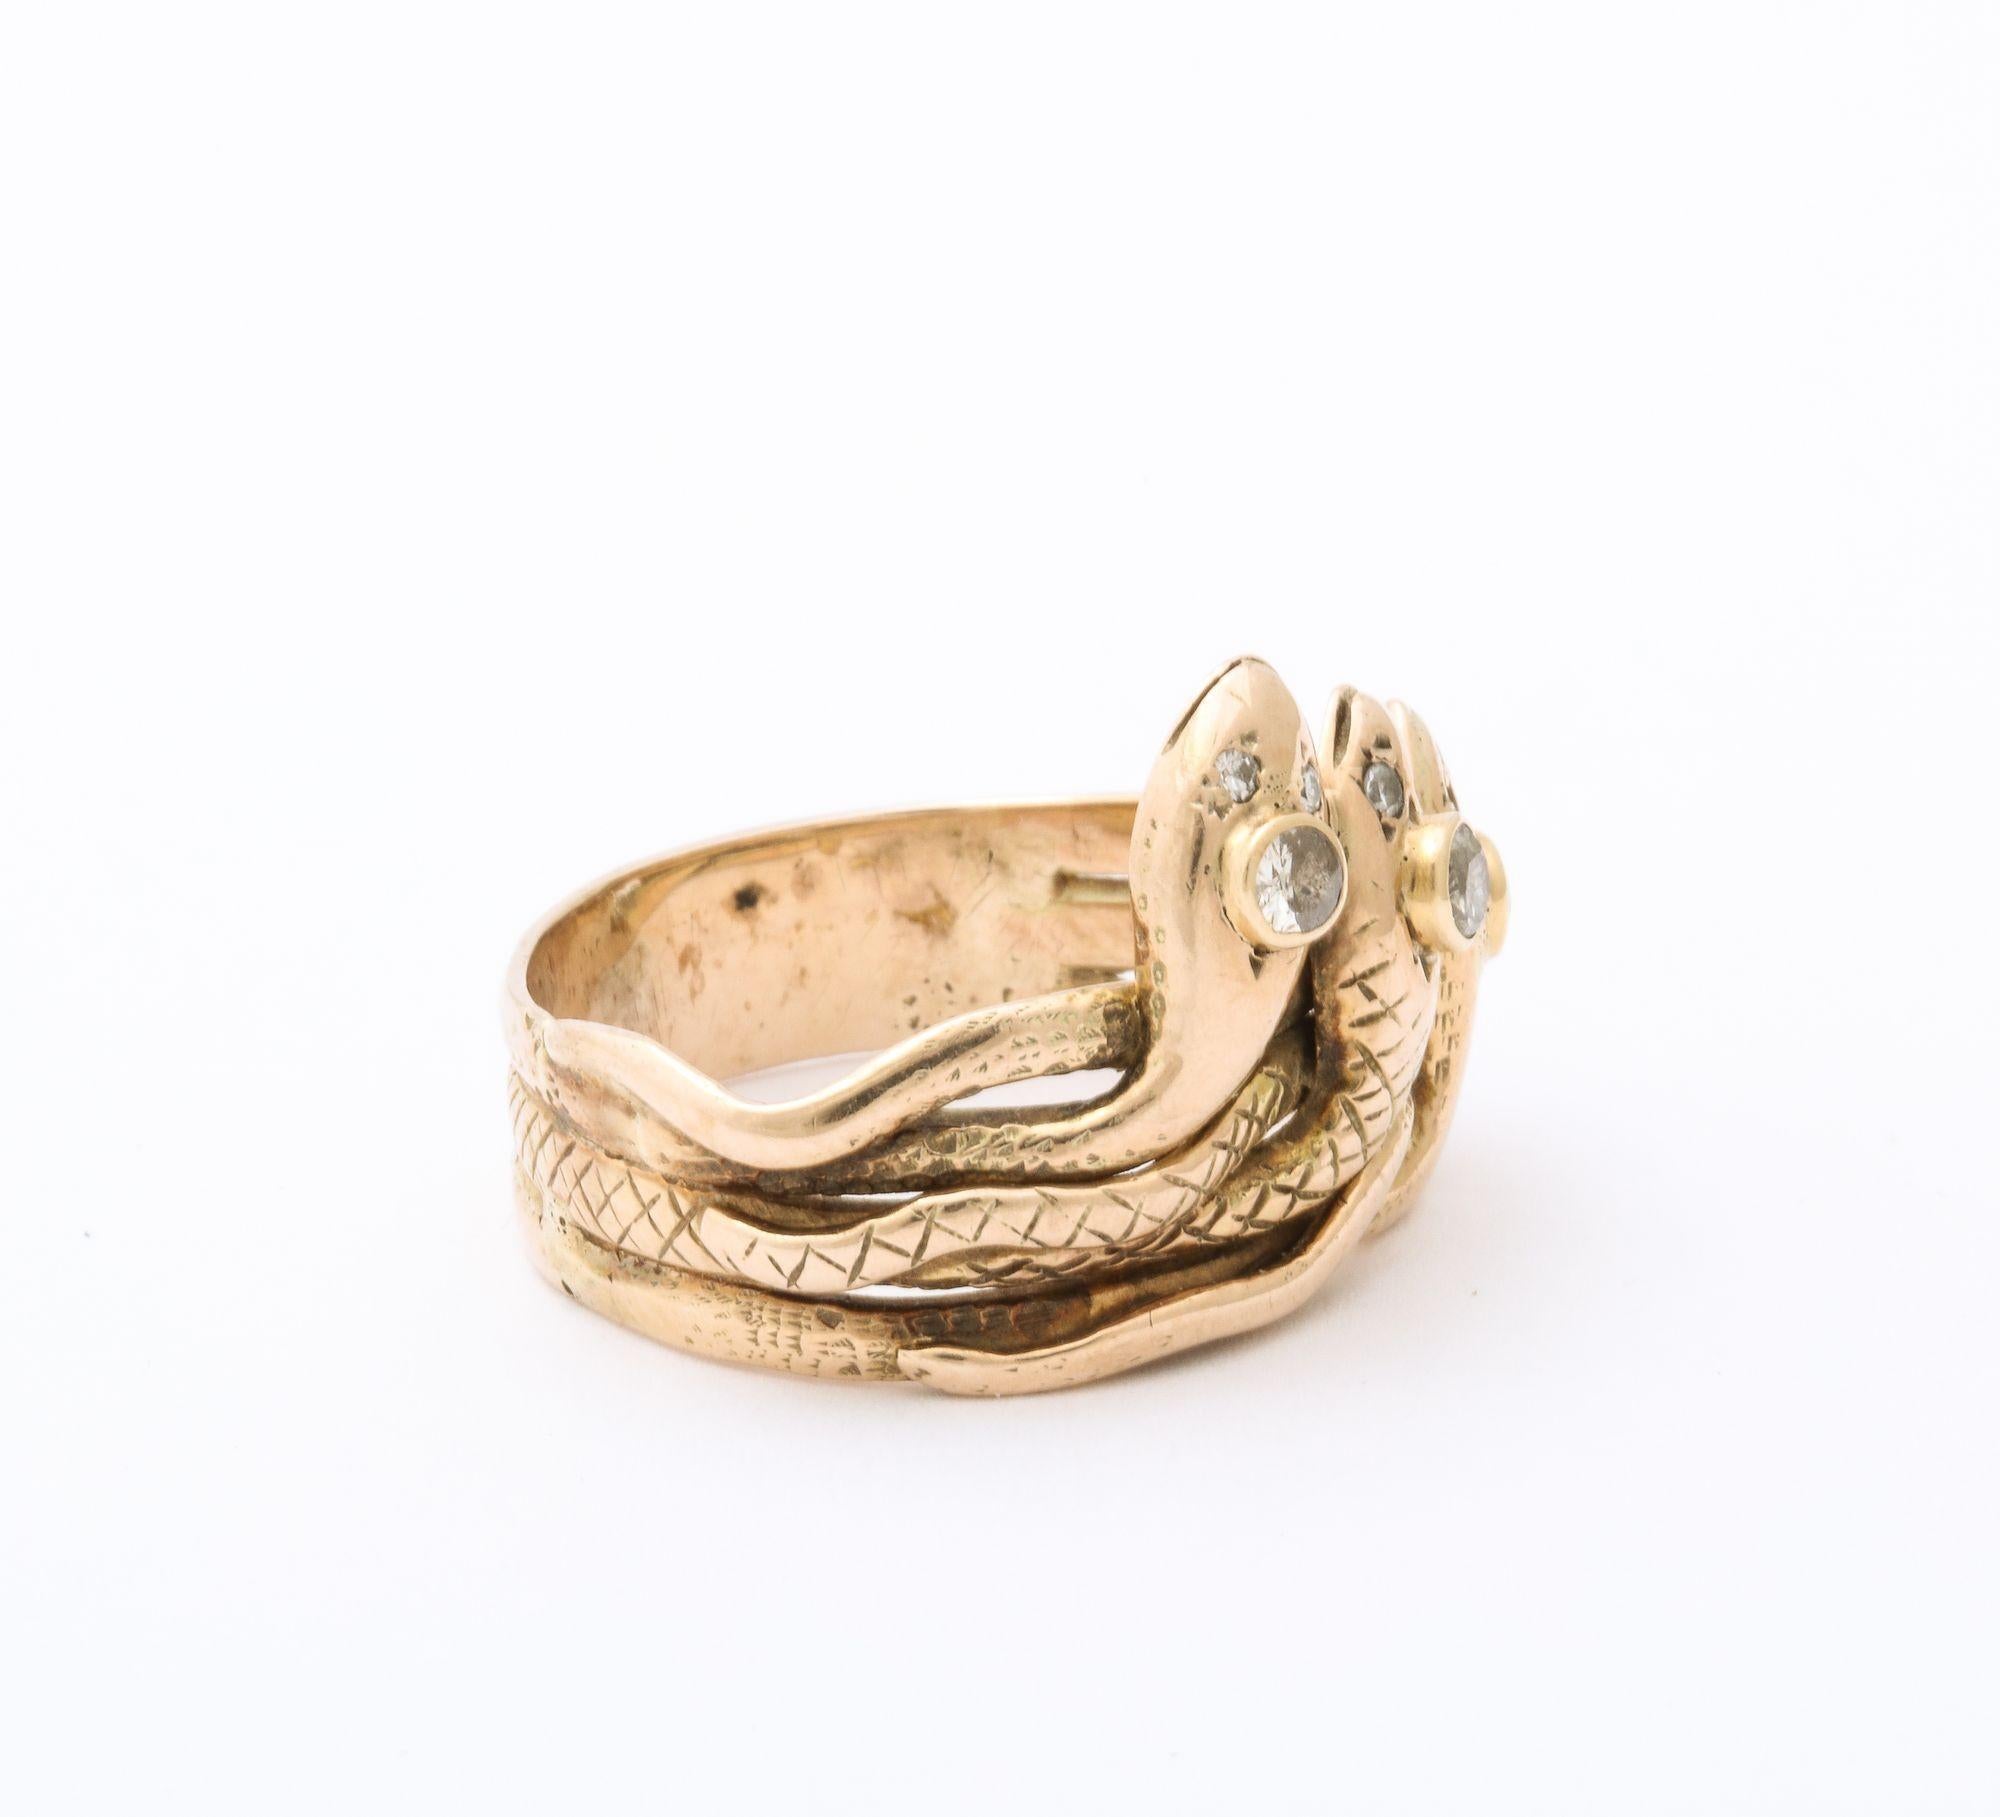 A fine Antique Gold and Diamond Triple Head Snake Ring